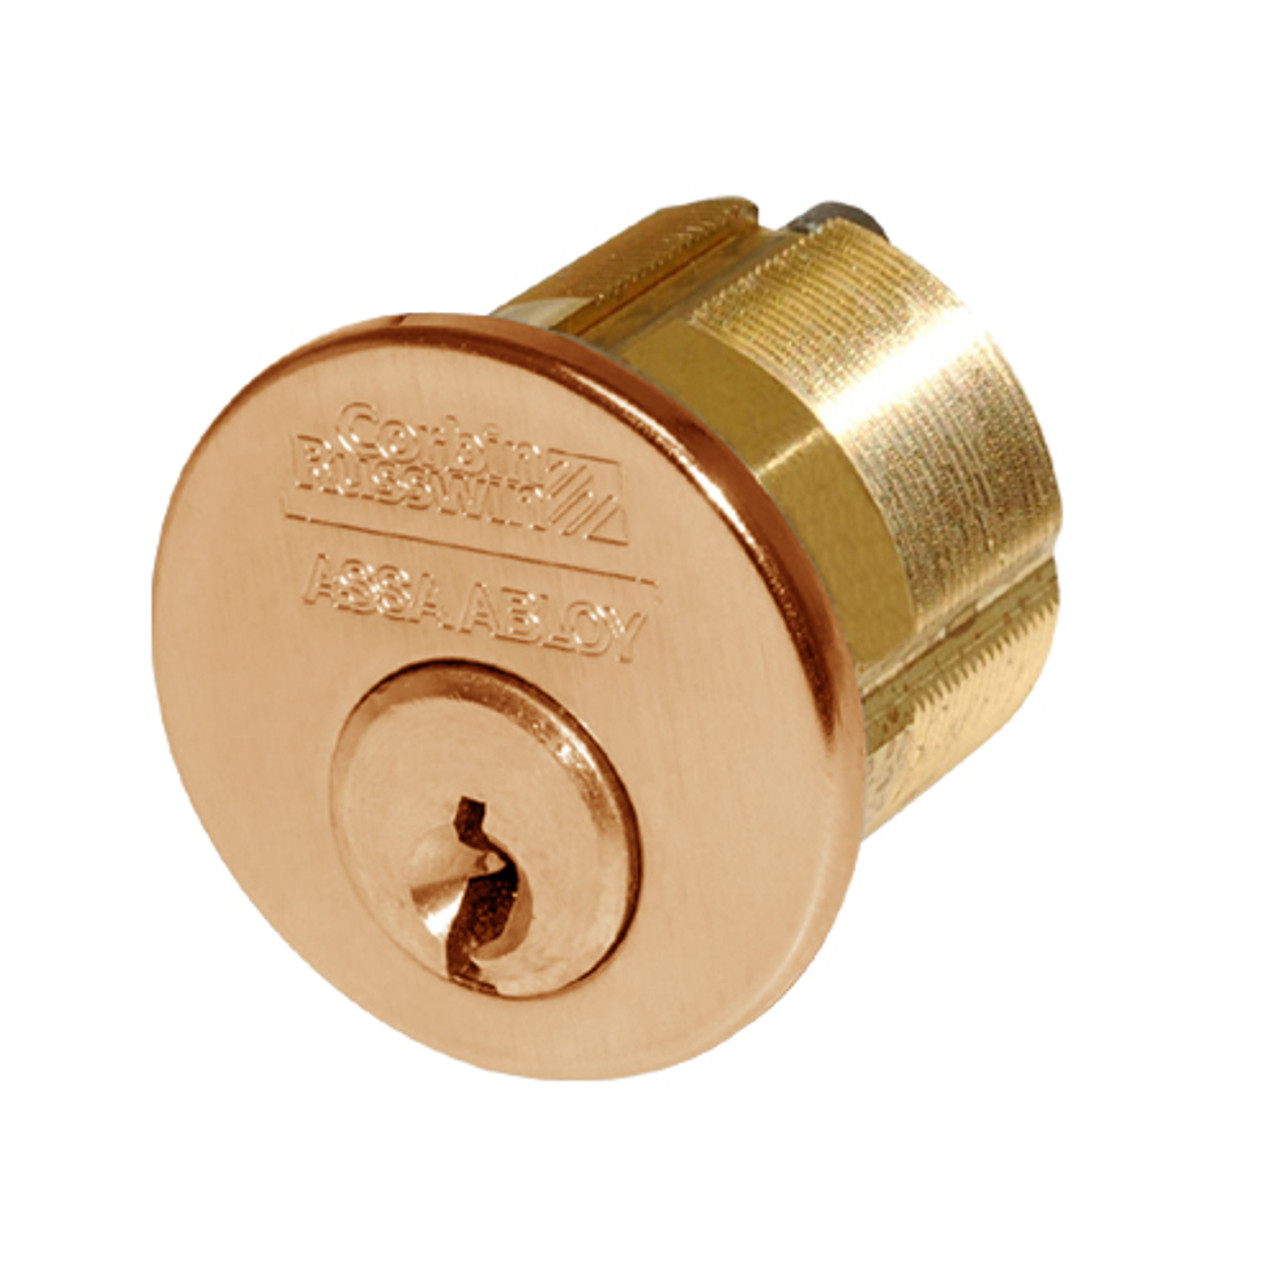 CR1000-200-A01-6-59A1-612 Corbin Conventional Mortise Cylinder for Mortise Lock and DL3000 Deadlocks with Cloverleaf Cam in Satin Bronze Finish